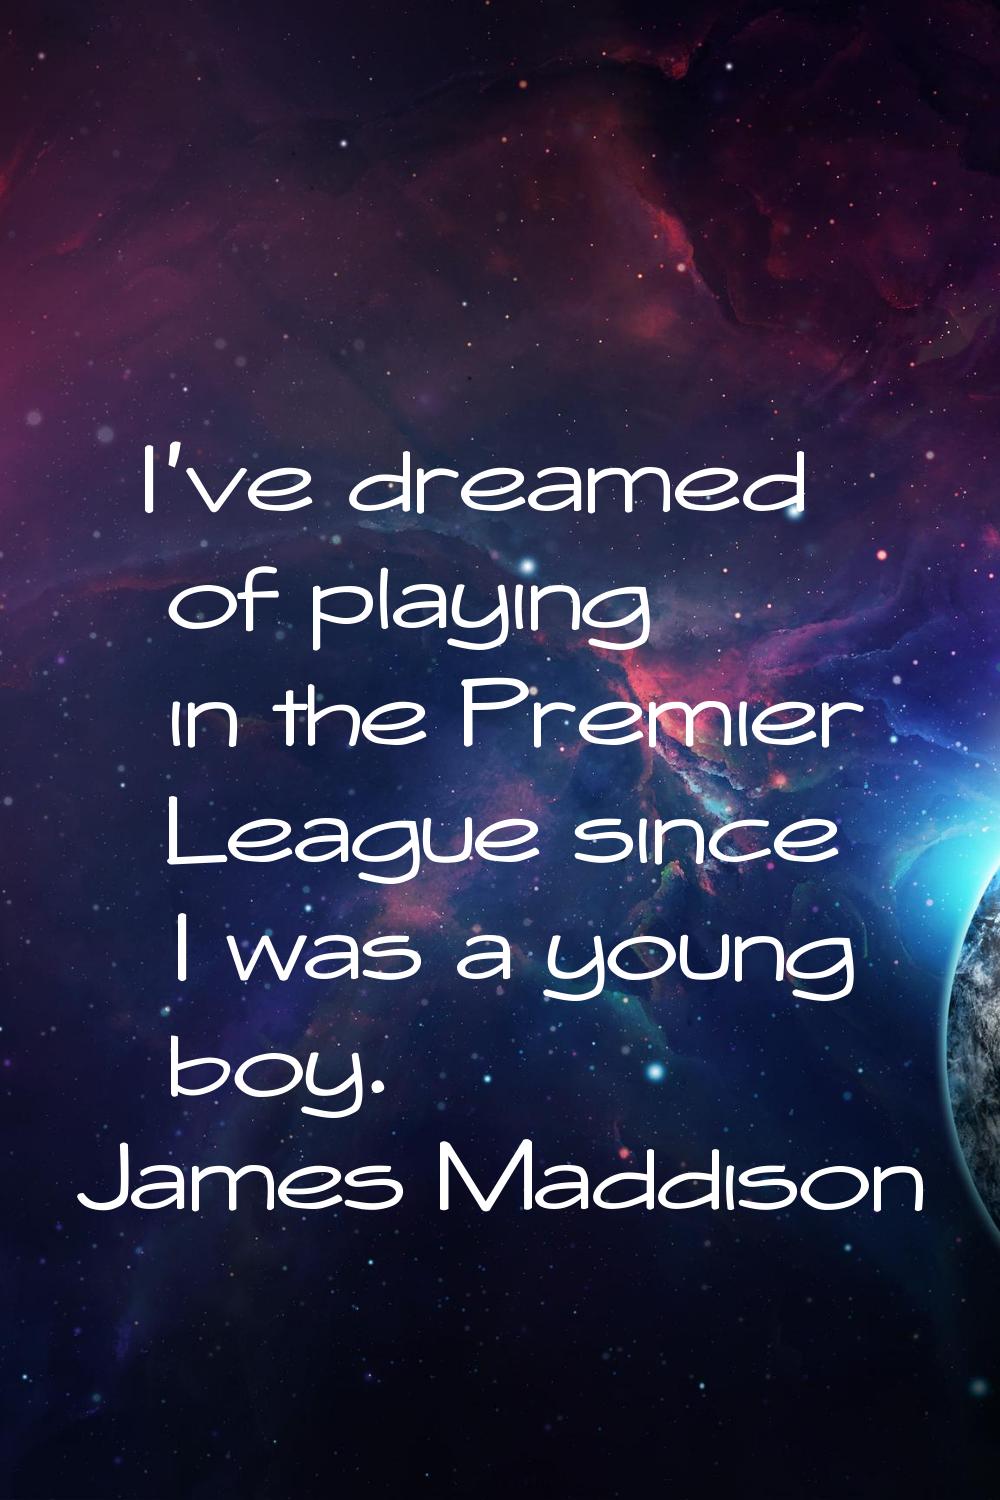 I've dreamed of playing in the Premier League since I was a young boy.